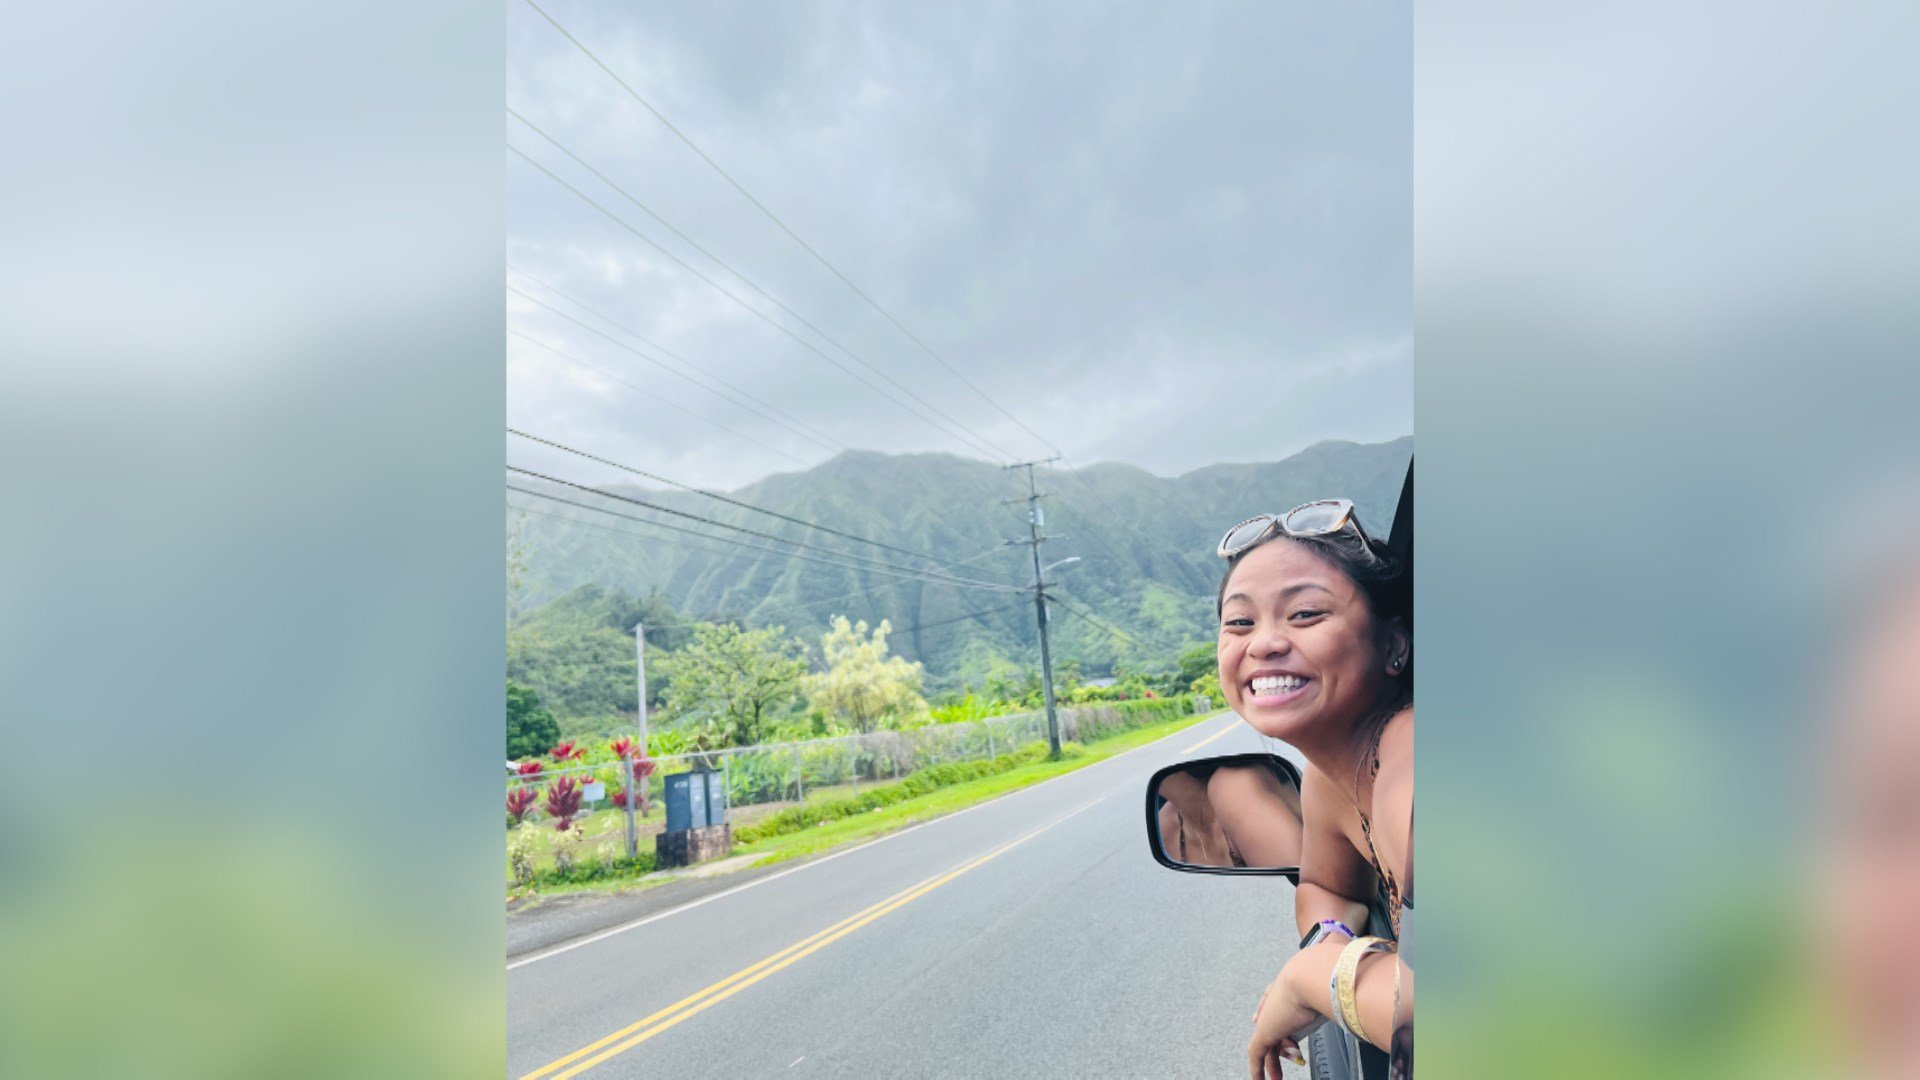 College Student from Hawaii Reacts to Maui Wildfires